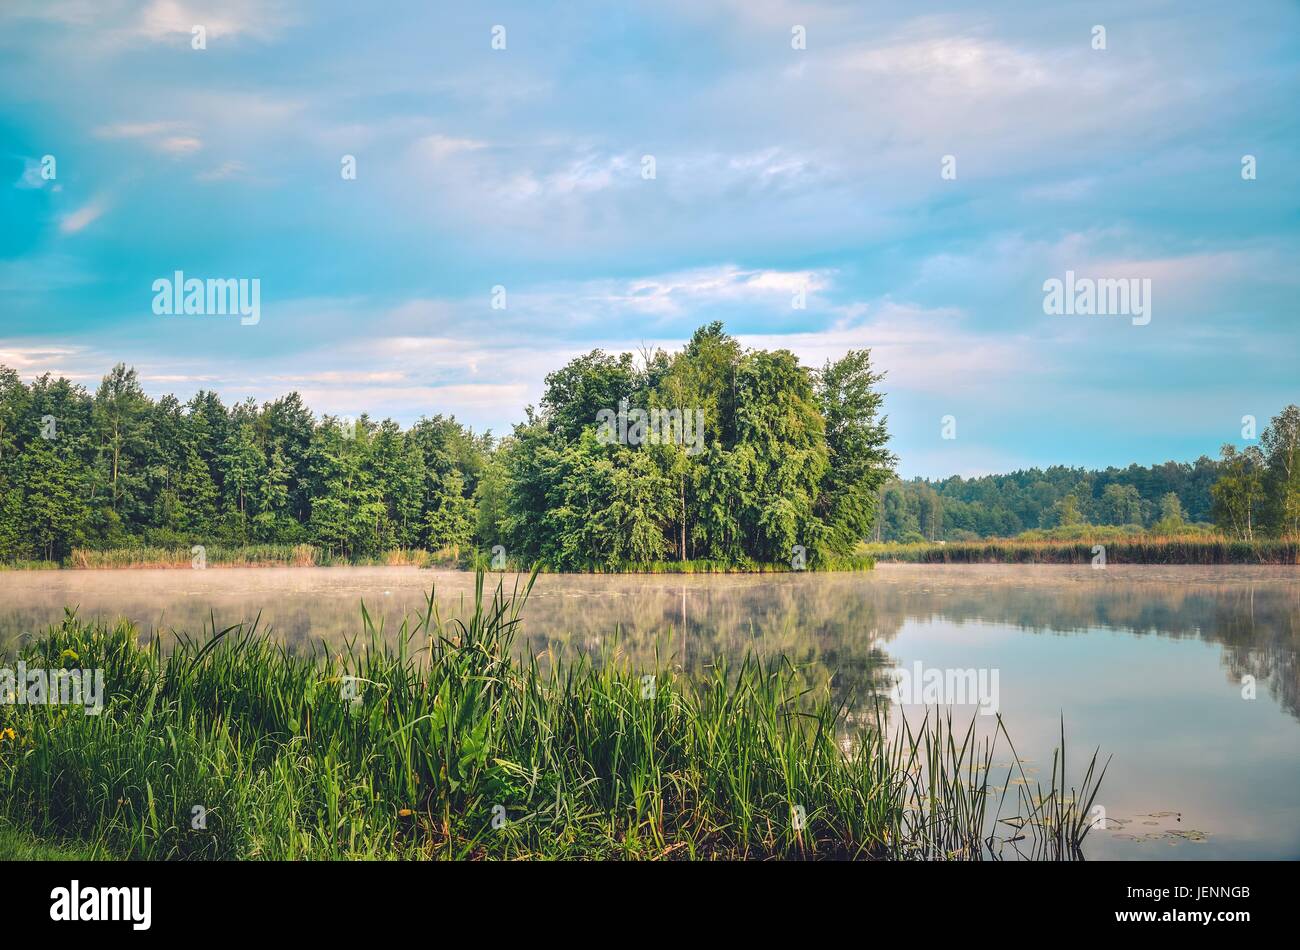 Nature landscape by the lake. Islet with green trees on the lake. Stock Photo